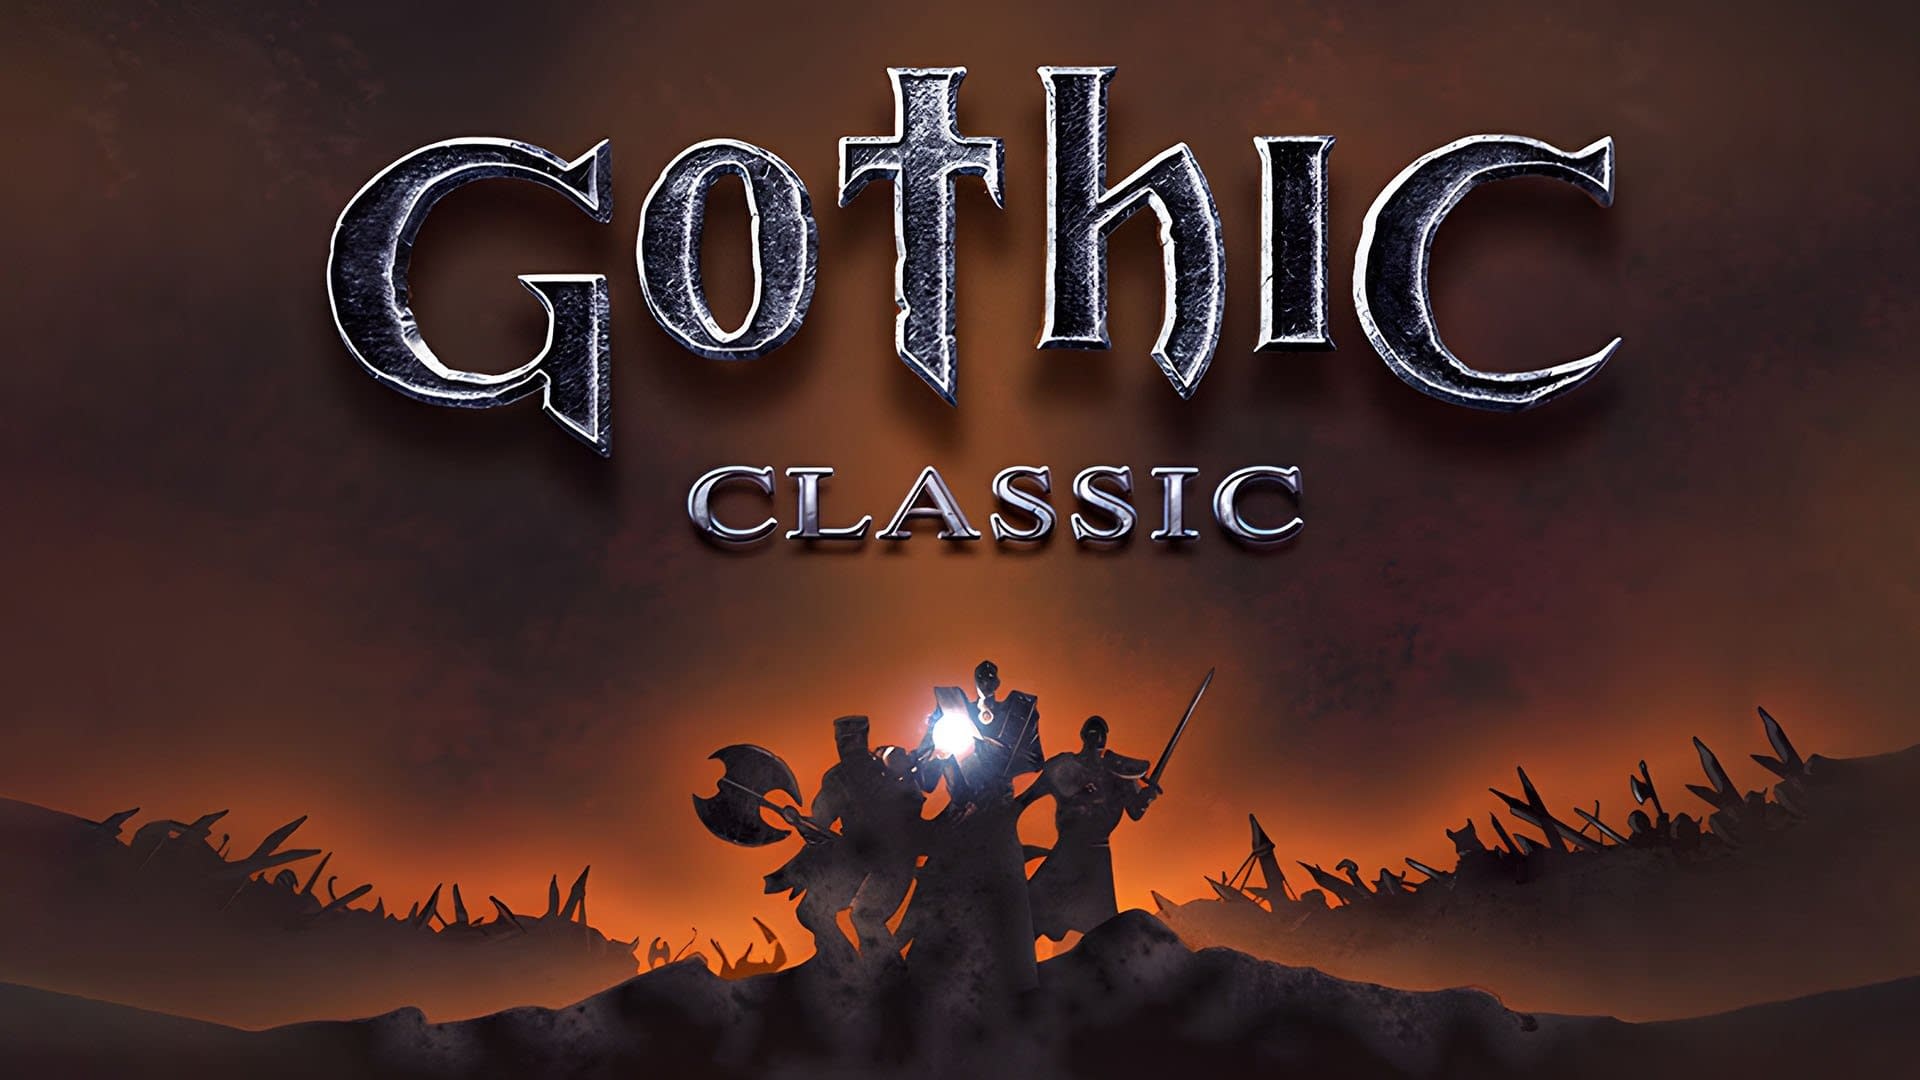 THK Nordic Announces the Future of Gothic Classic to Switch Console